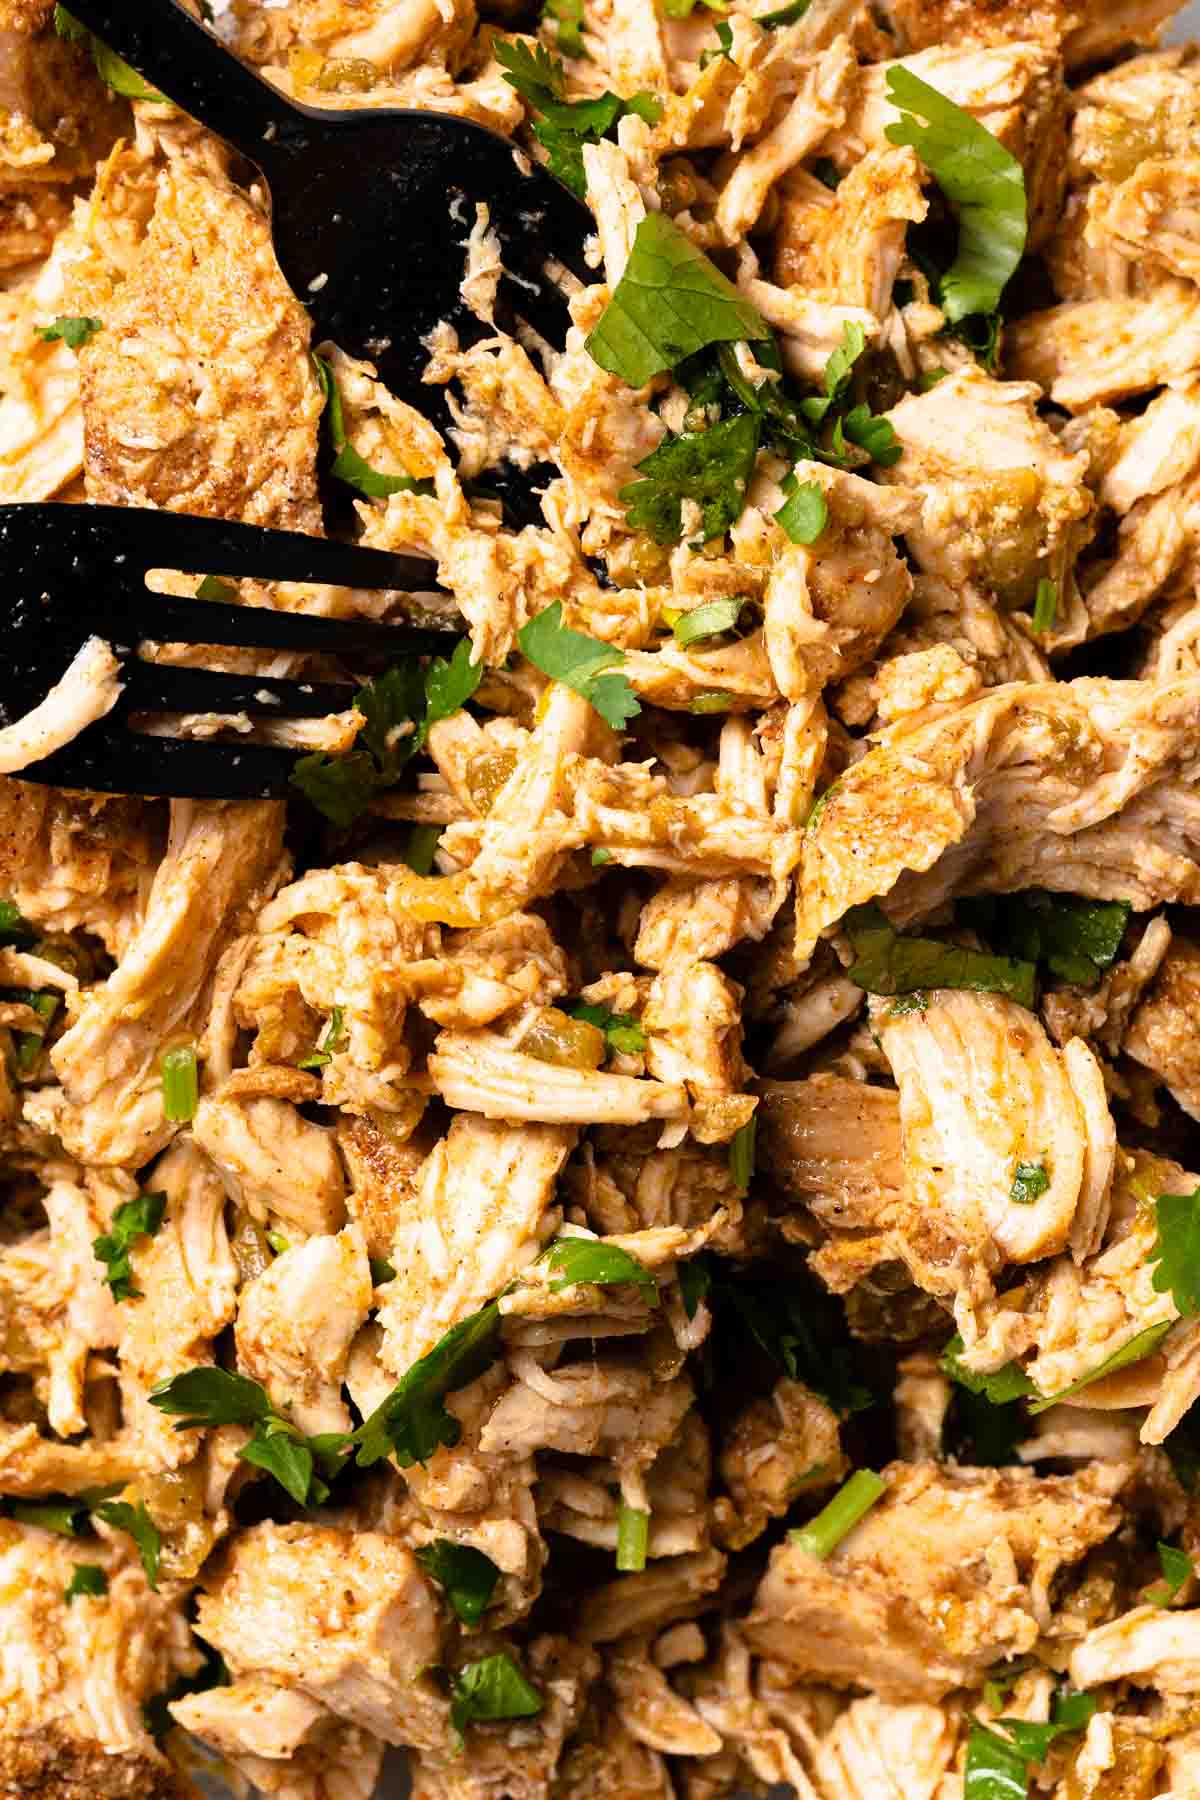 shredded seasoned chicken with two forks